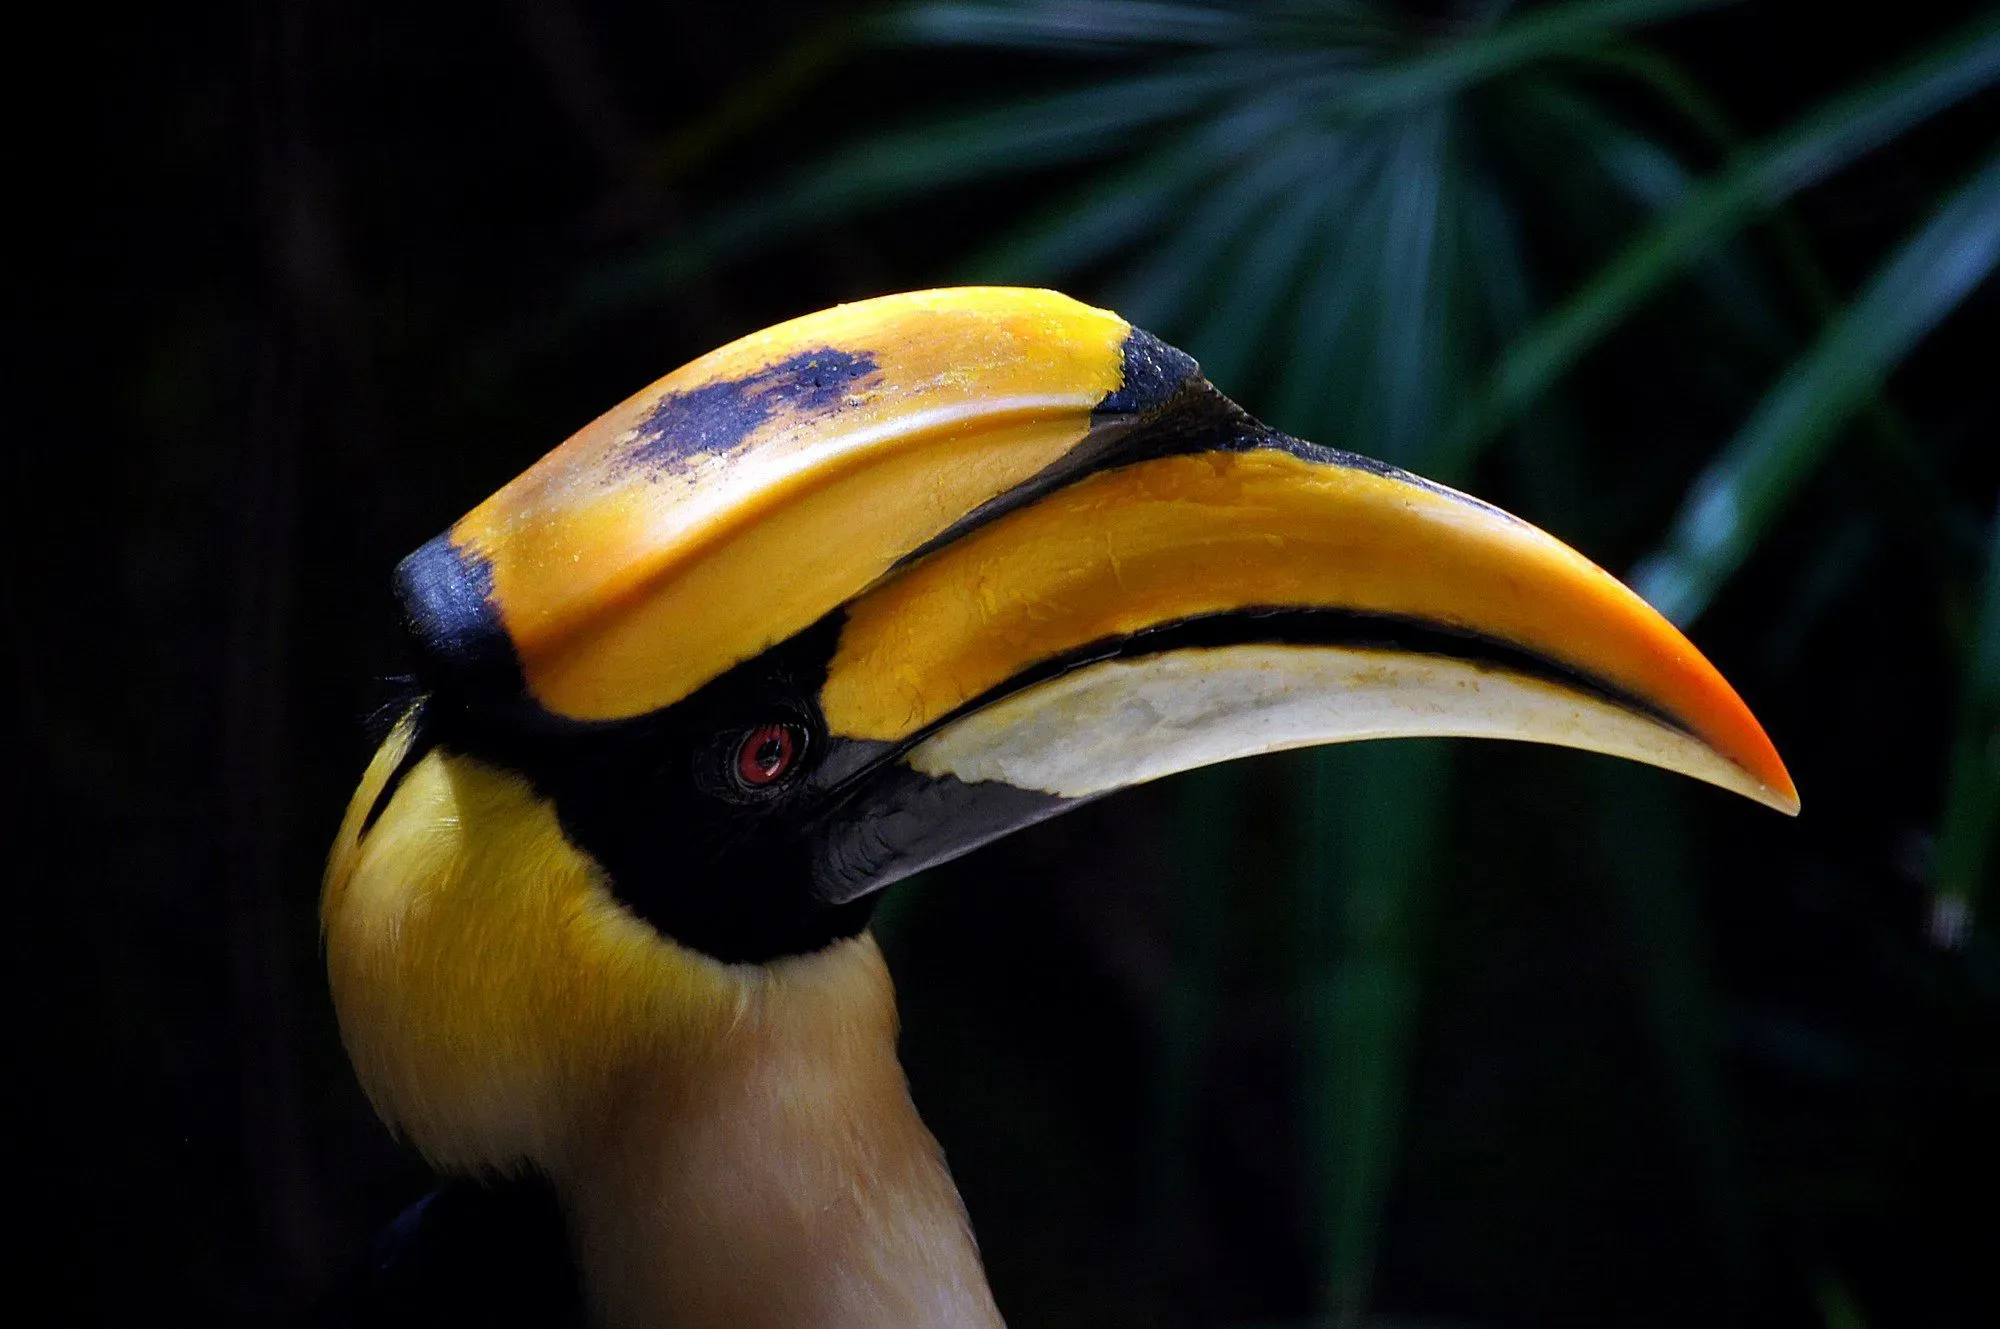 The size of the casques of hornbills is seen as a measurement tool of superiority.